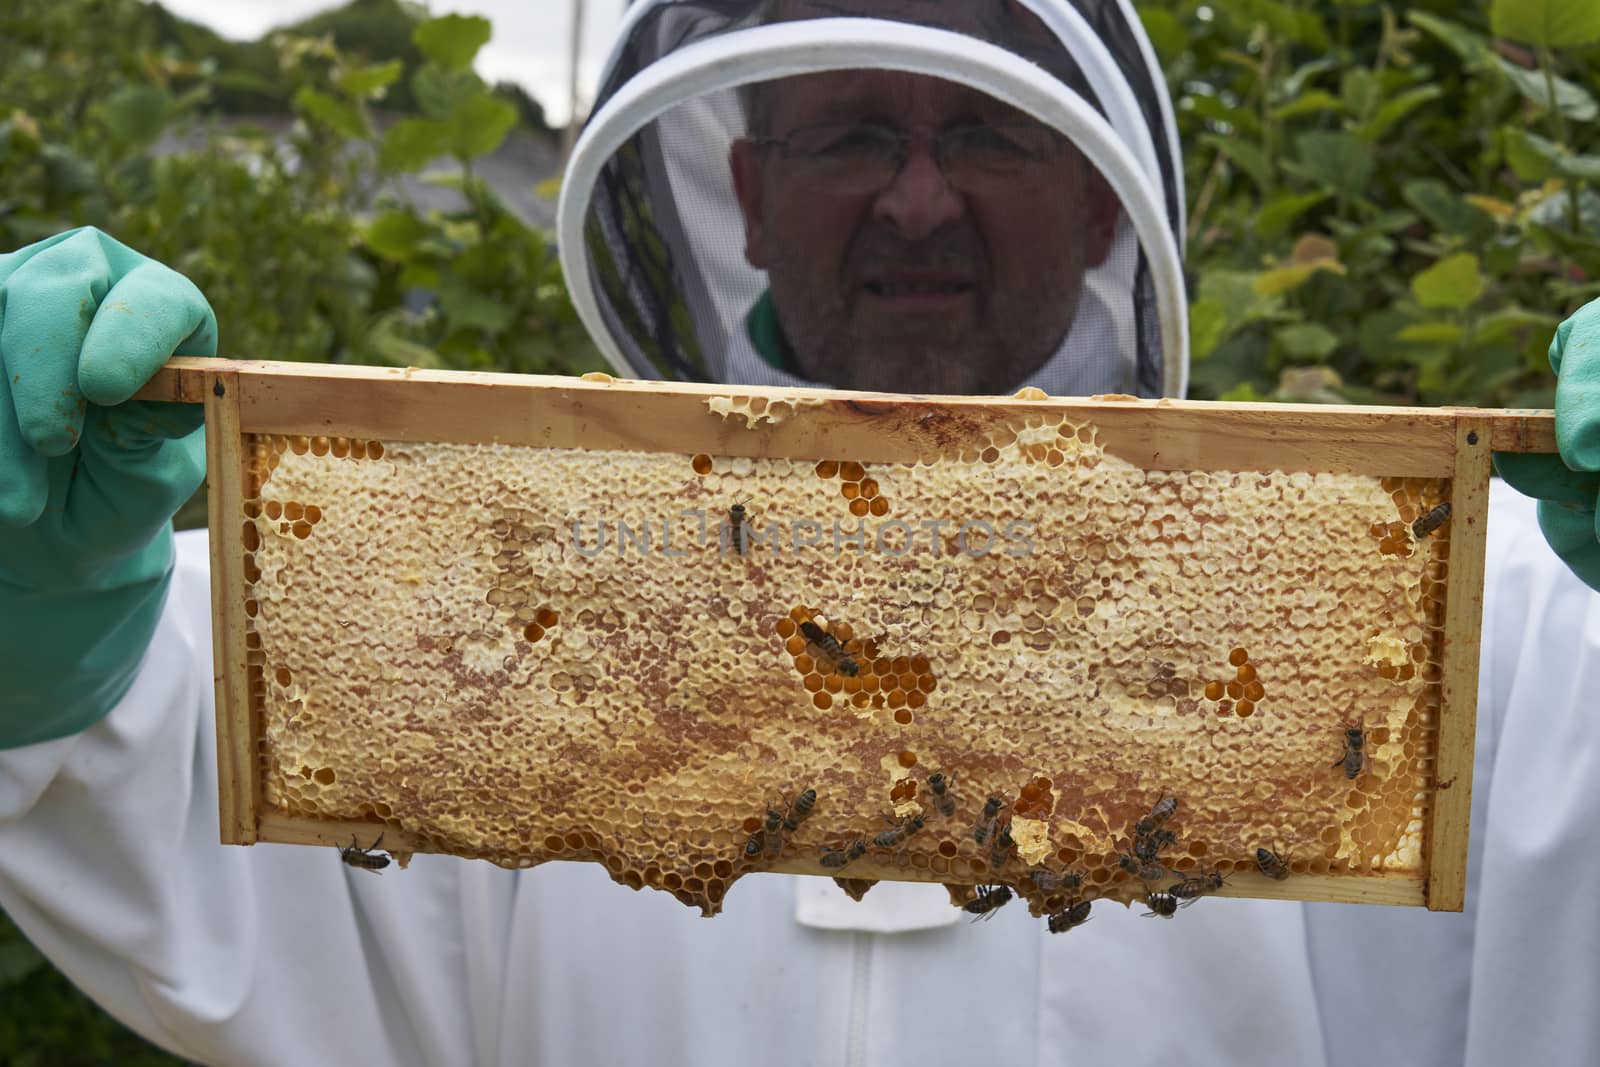 Beekeeper inspecting a frame of honey from hive by gemphotography